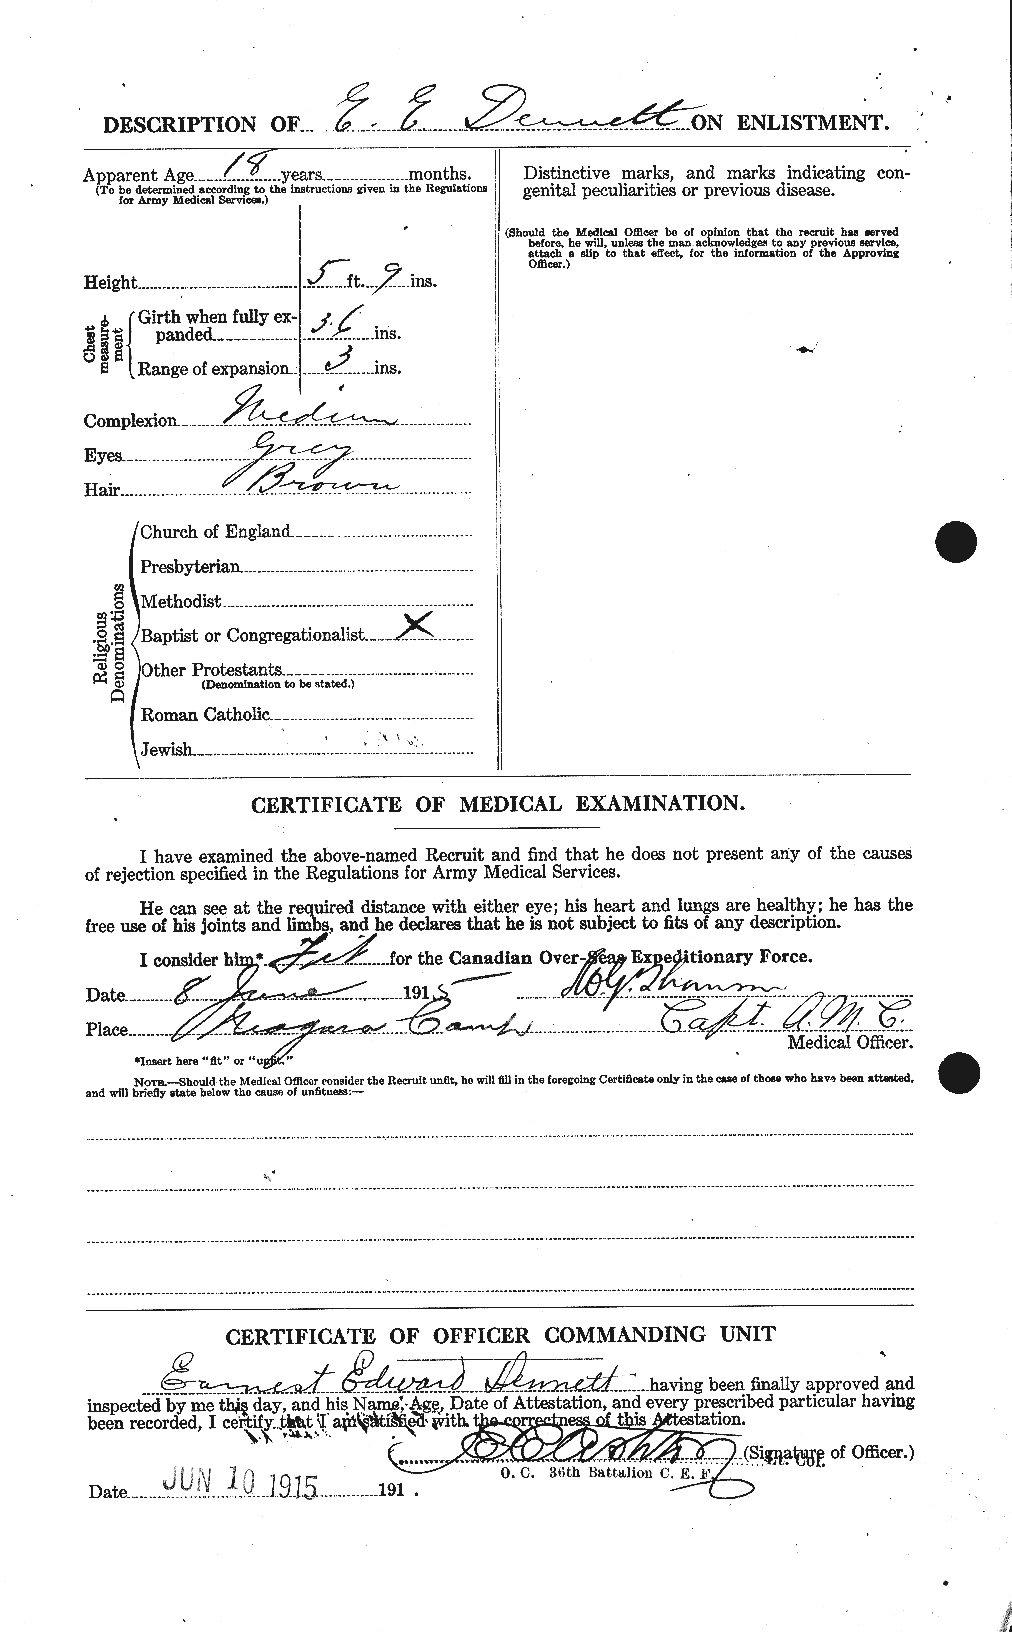 Personnel Records of the First World War - CEF 286072b